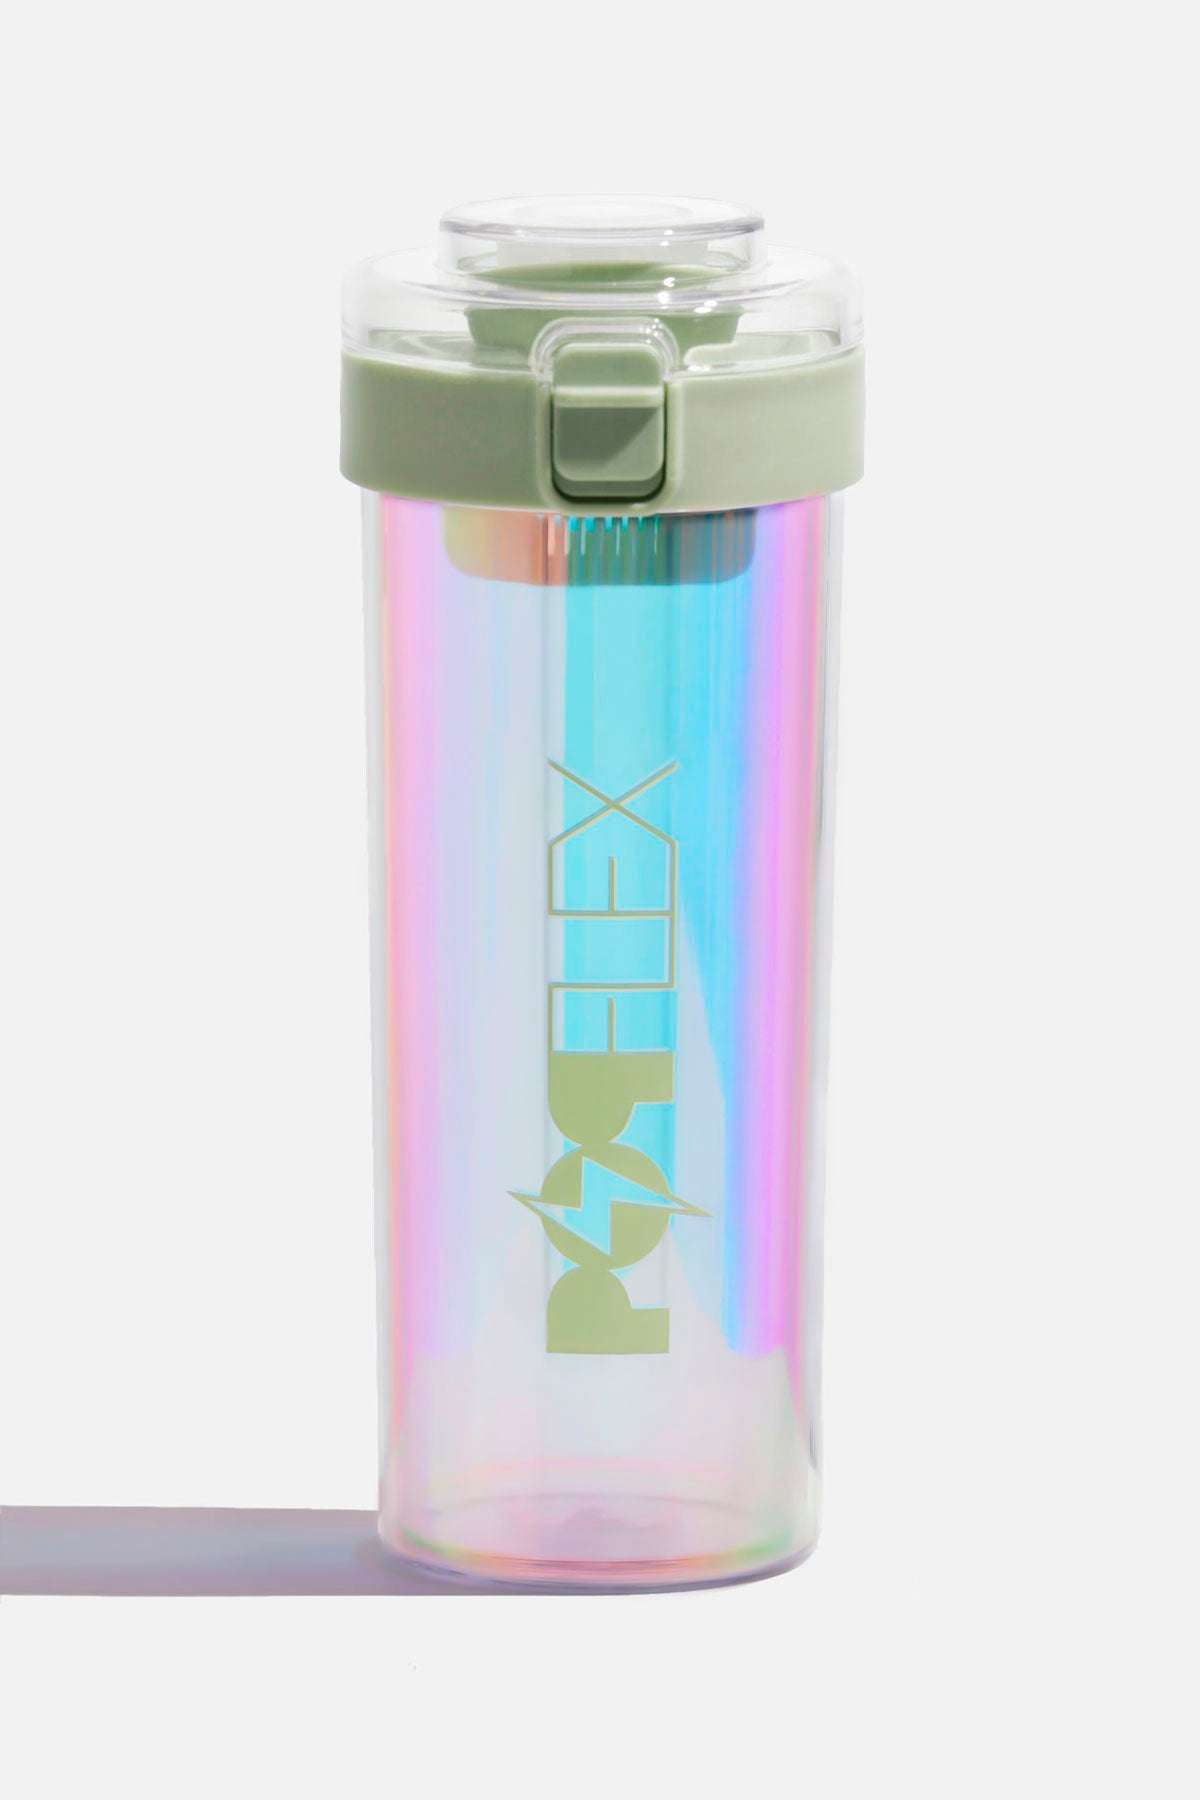 Water Bottle With Time Marker - Ready Set Glow - 1 Gallon Motivational  Timer Water Bottle with Fruit Infuser - Peach Terrazzo – POPFLEX®